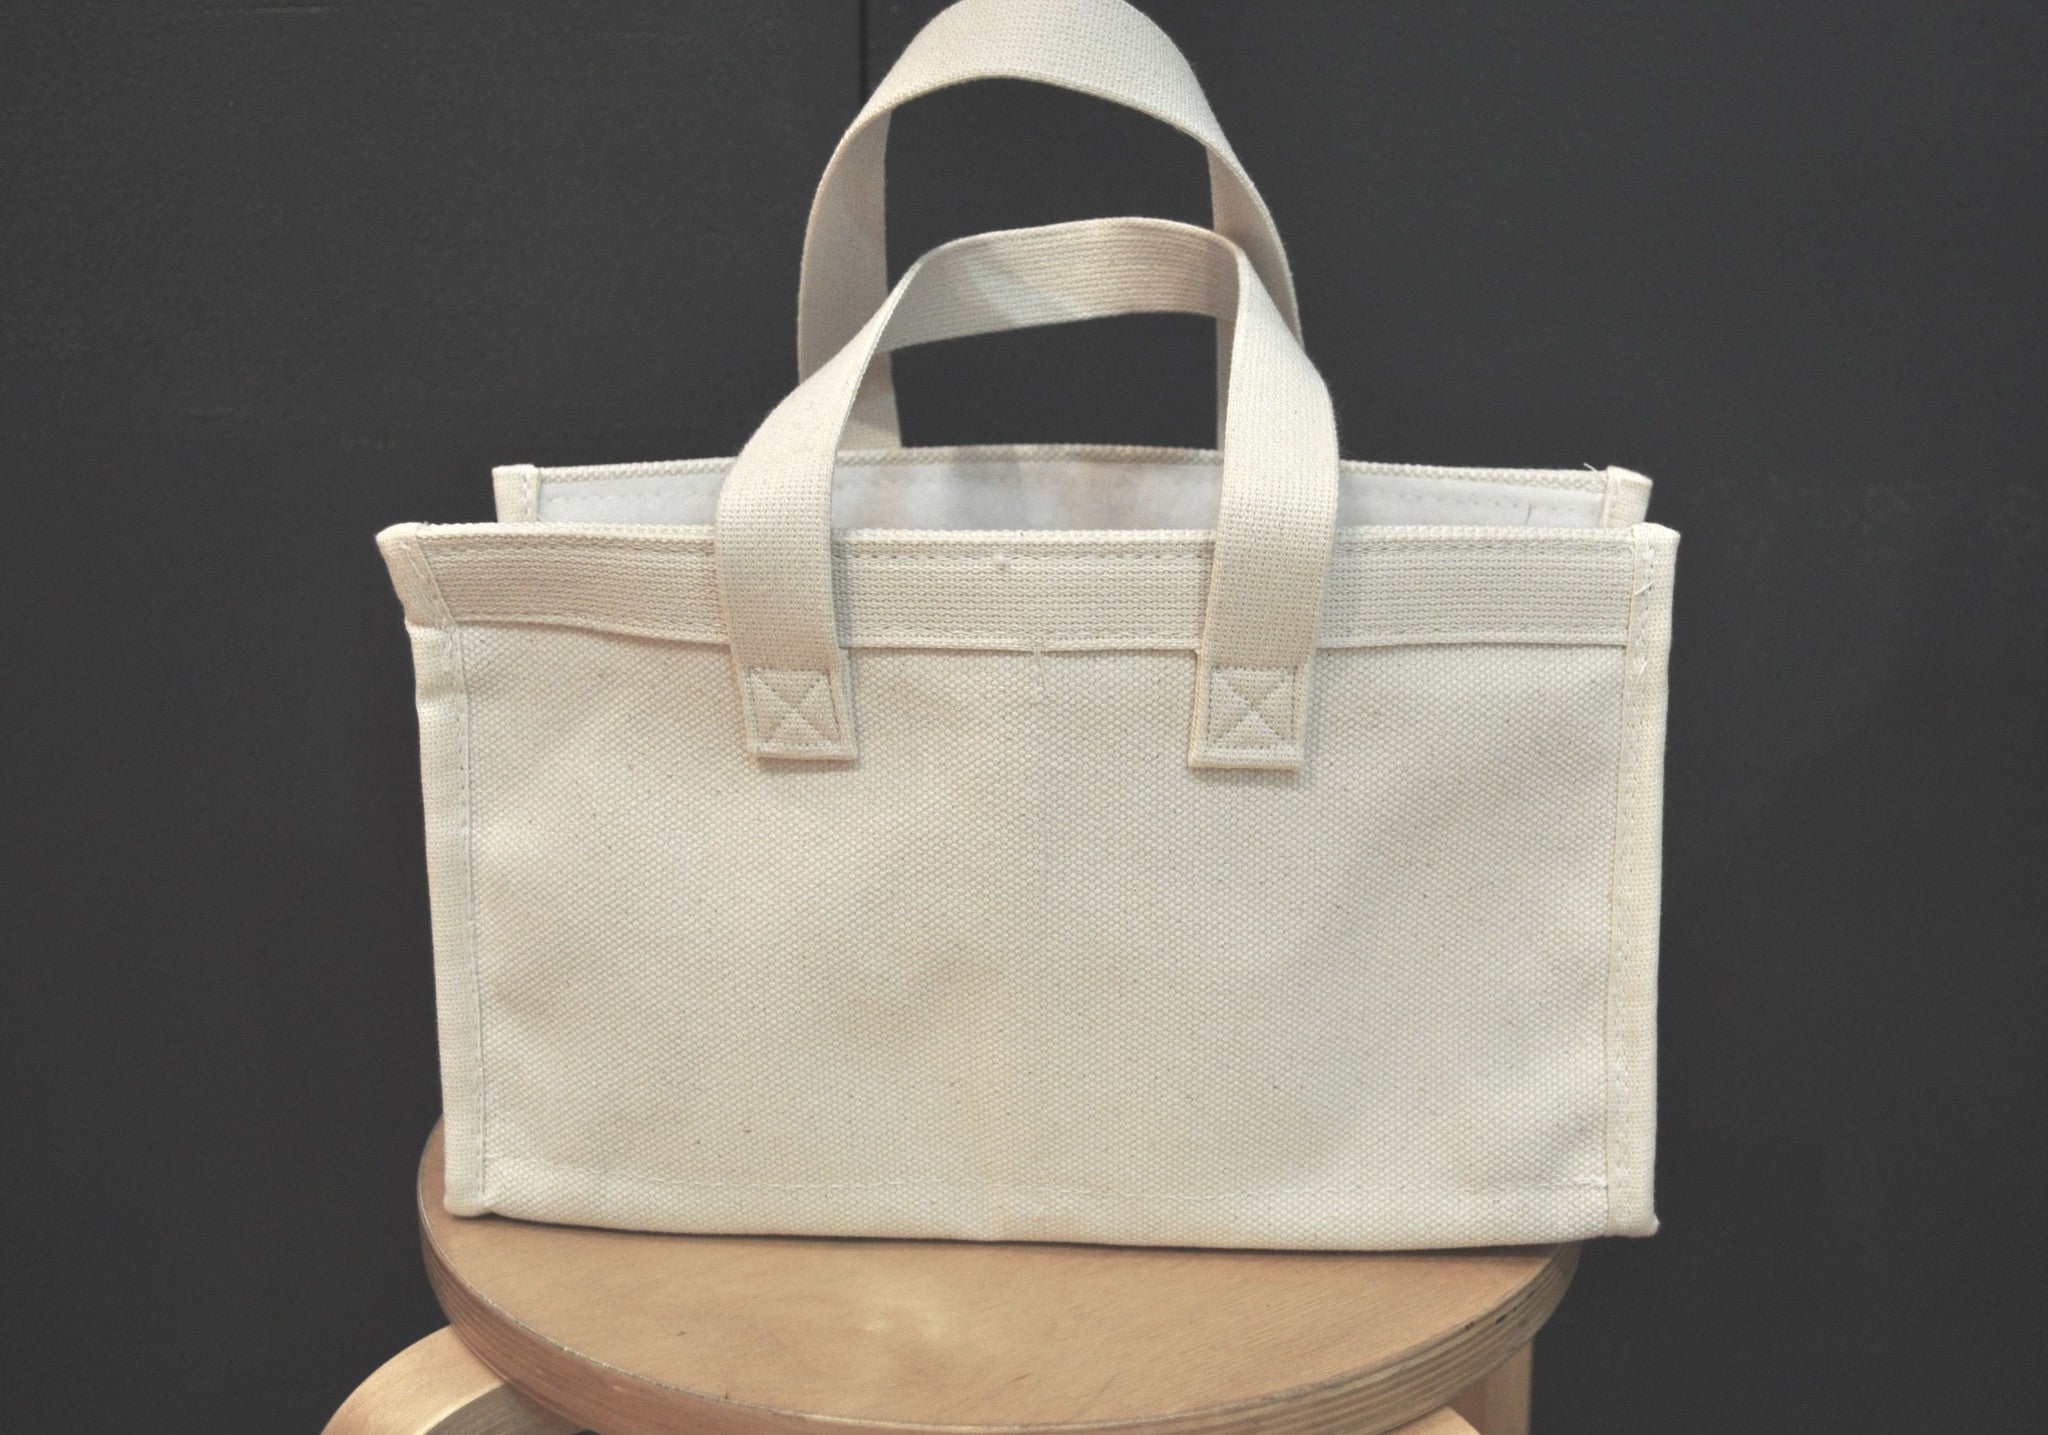 tools / heavy duty utilitarian canvas tote bag SMALL – LOST WAX STUDIO NYC  - made in nyc